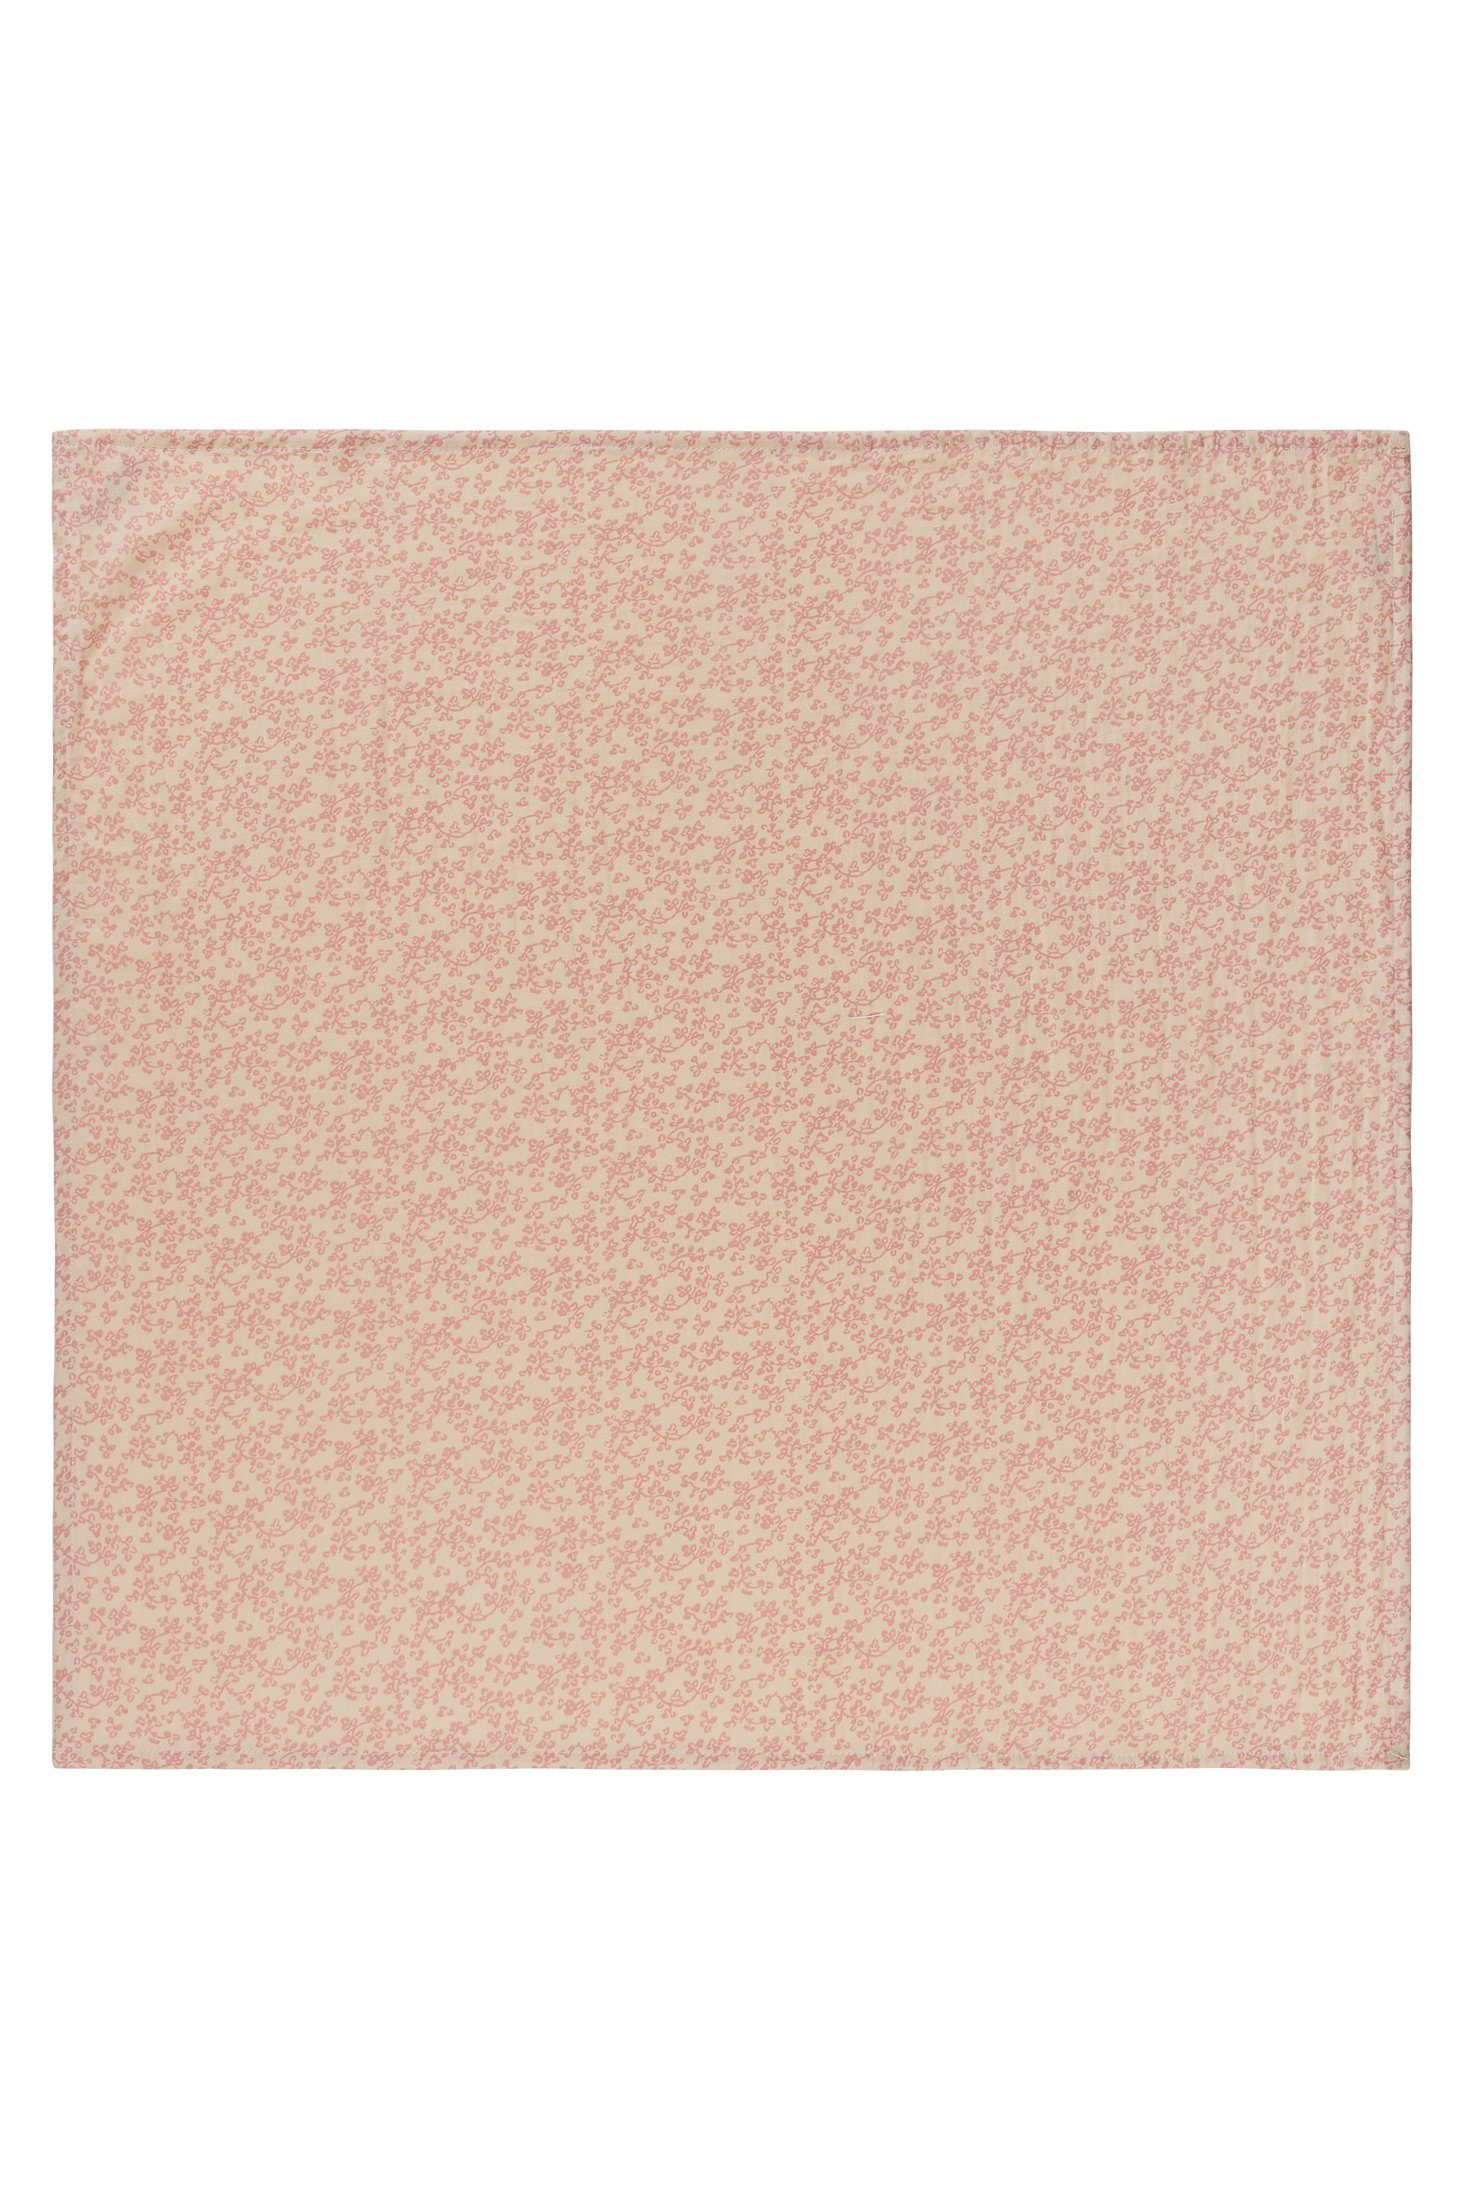 Noppies 2-pack Rose 70x70 Windeln Noppies Mulltuch Multi-Pack Misty cm (1-St) Mixed